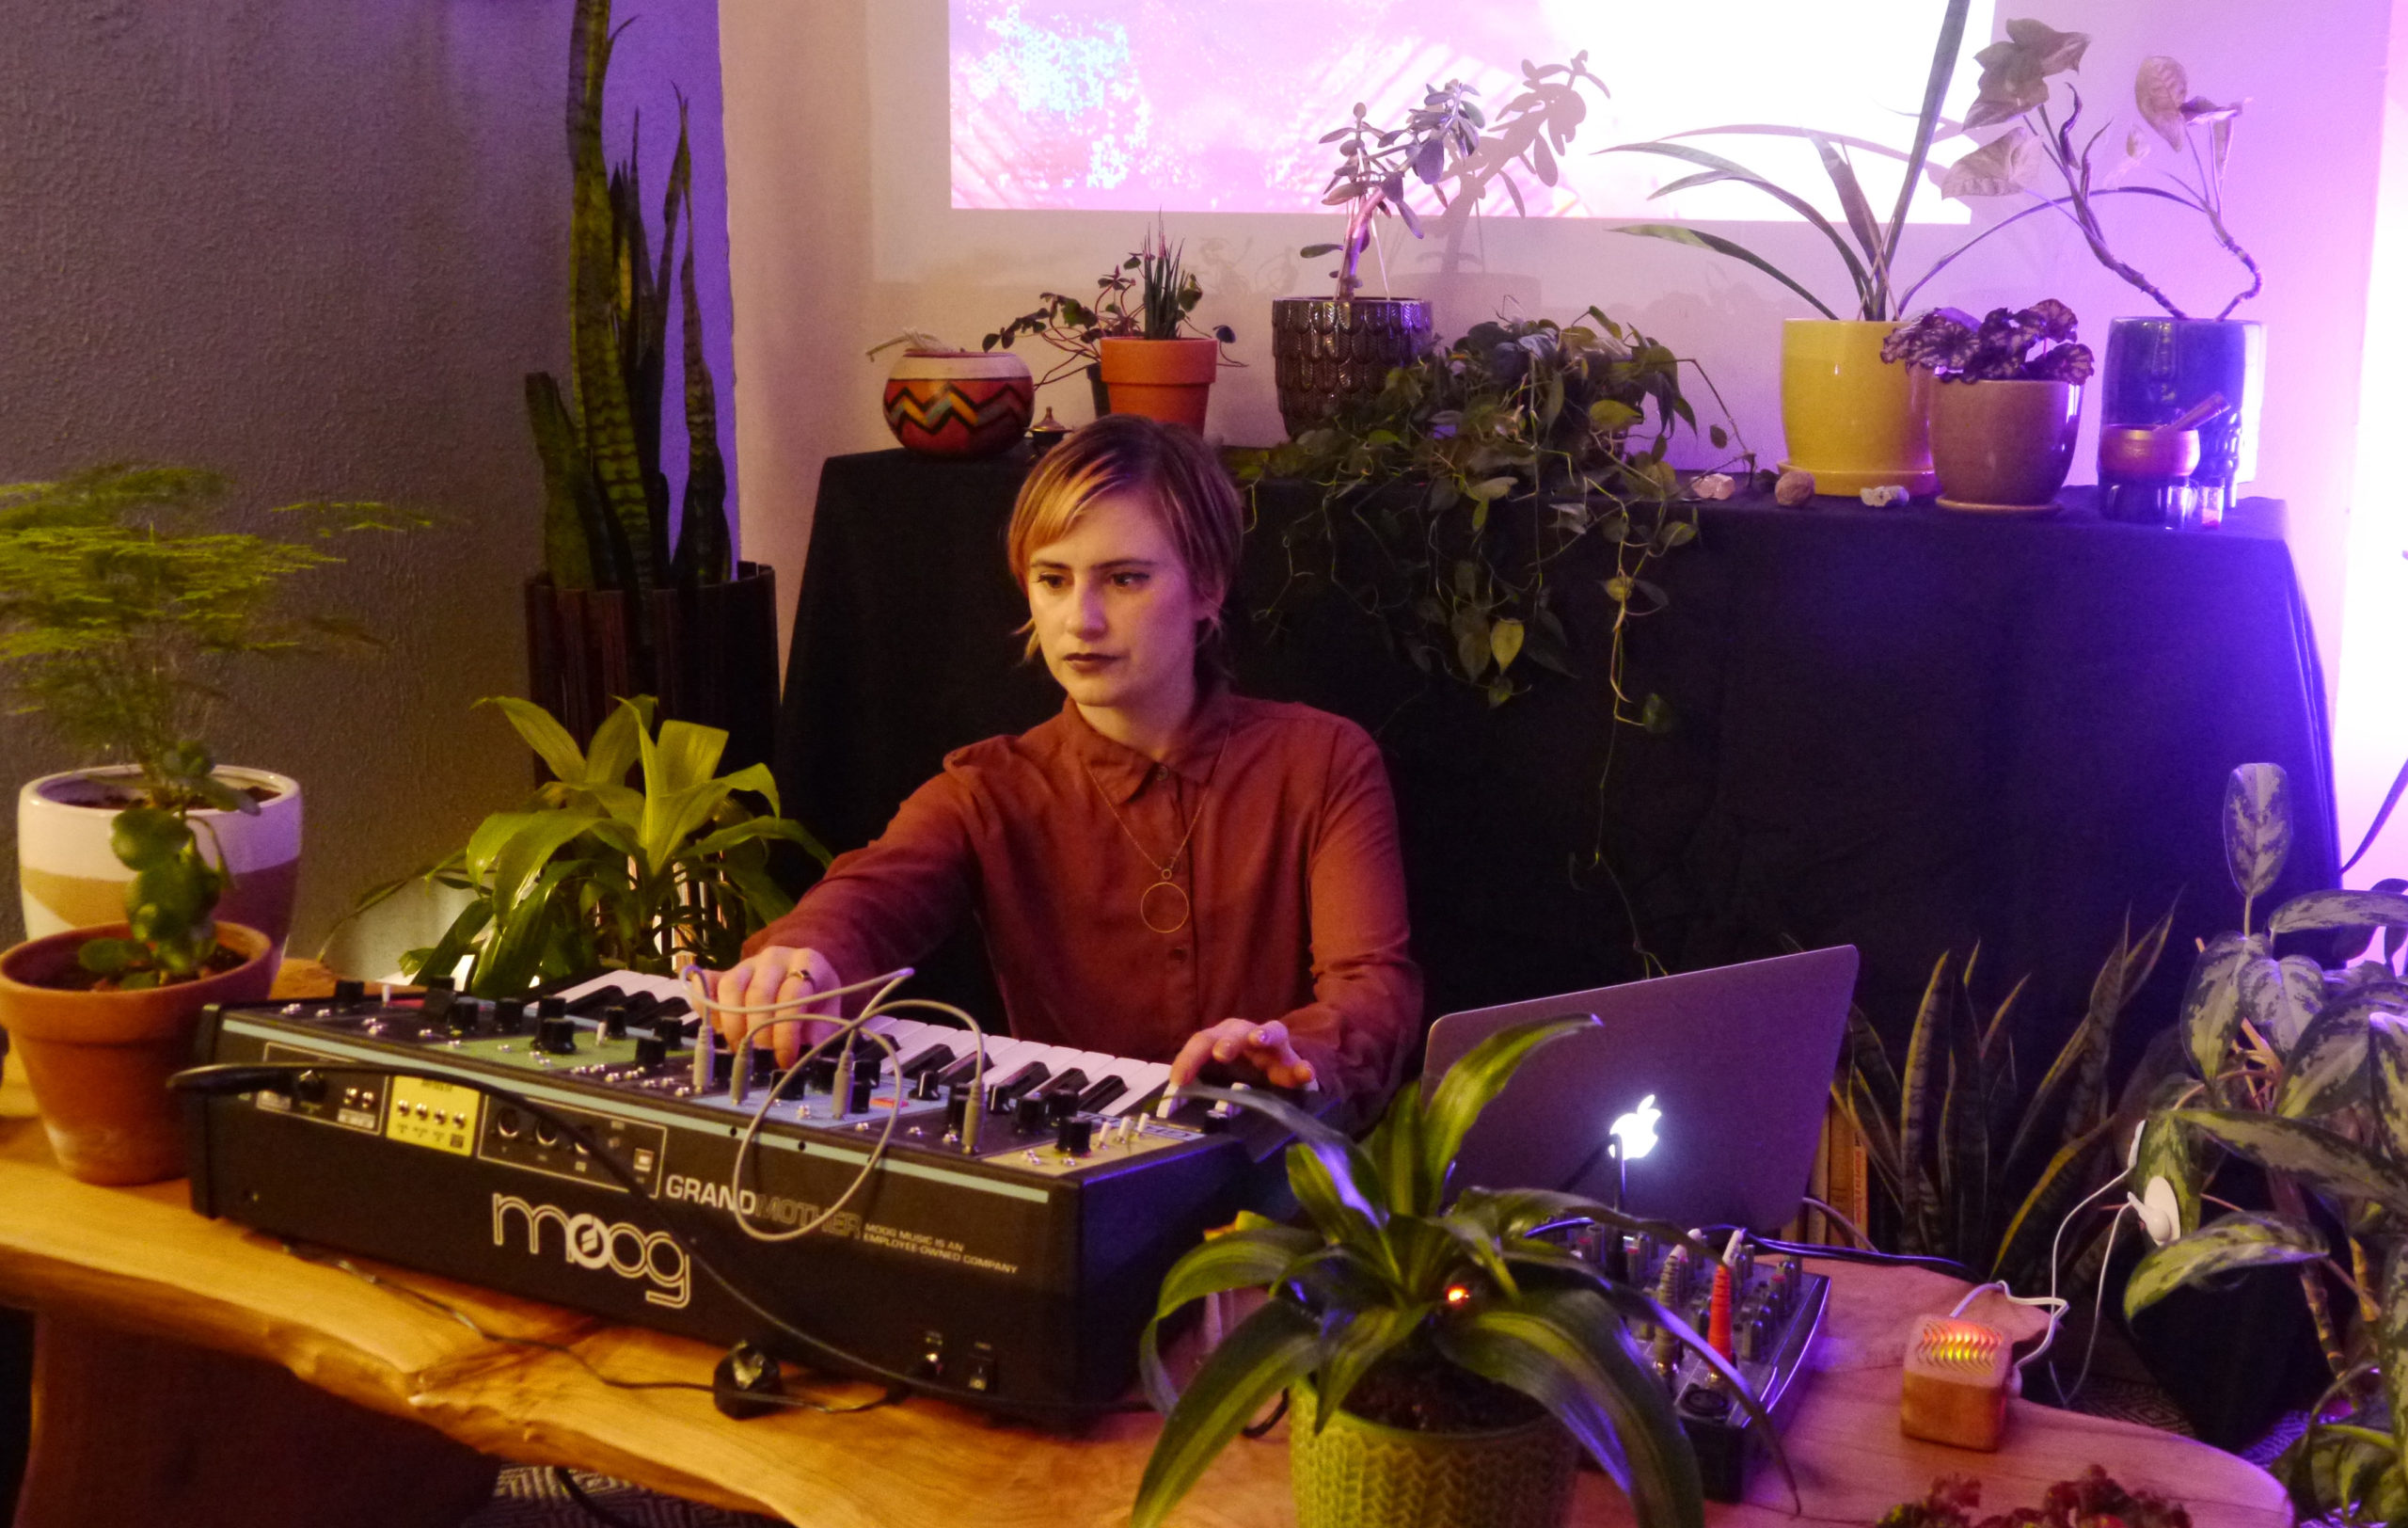 Amy Reid performing on a Moog synthesizer on a table with a Mac laptop and a bunch of plants.